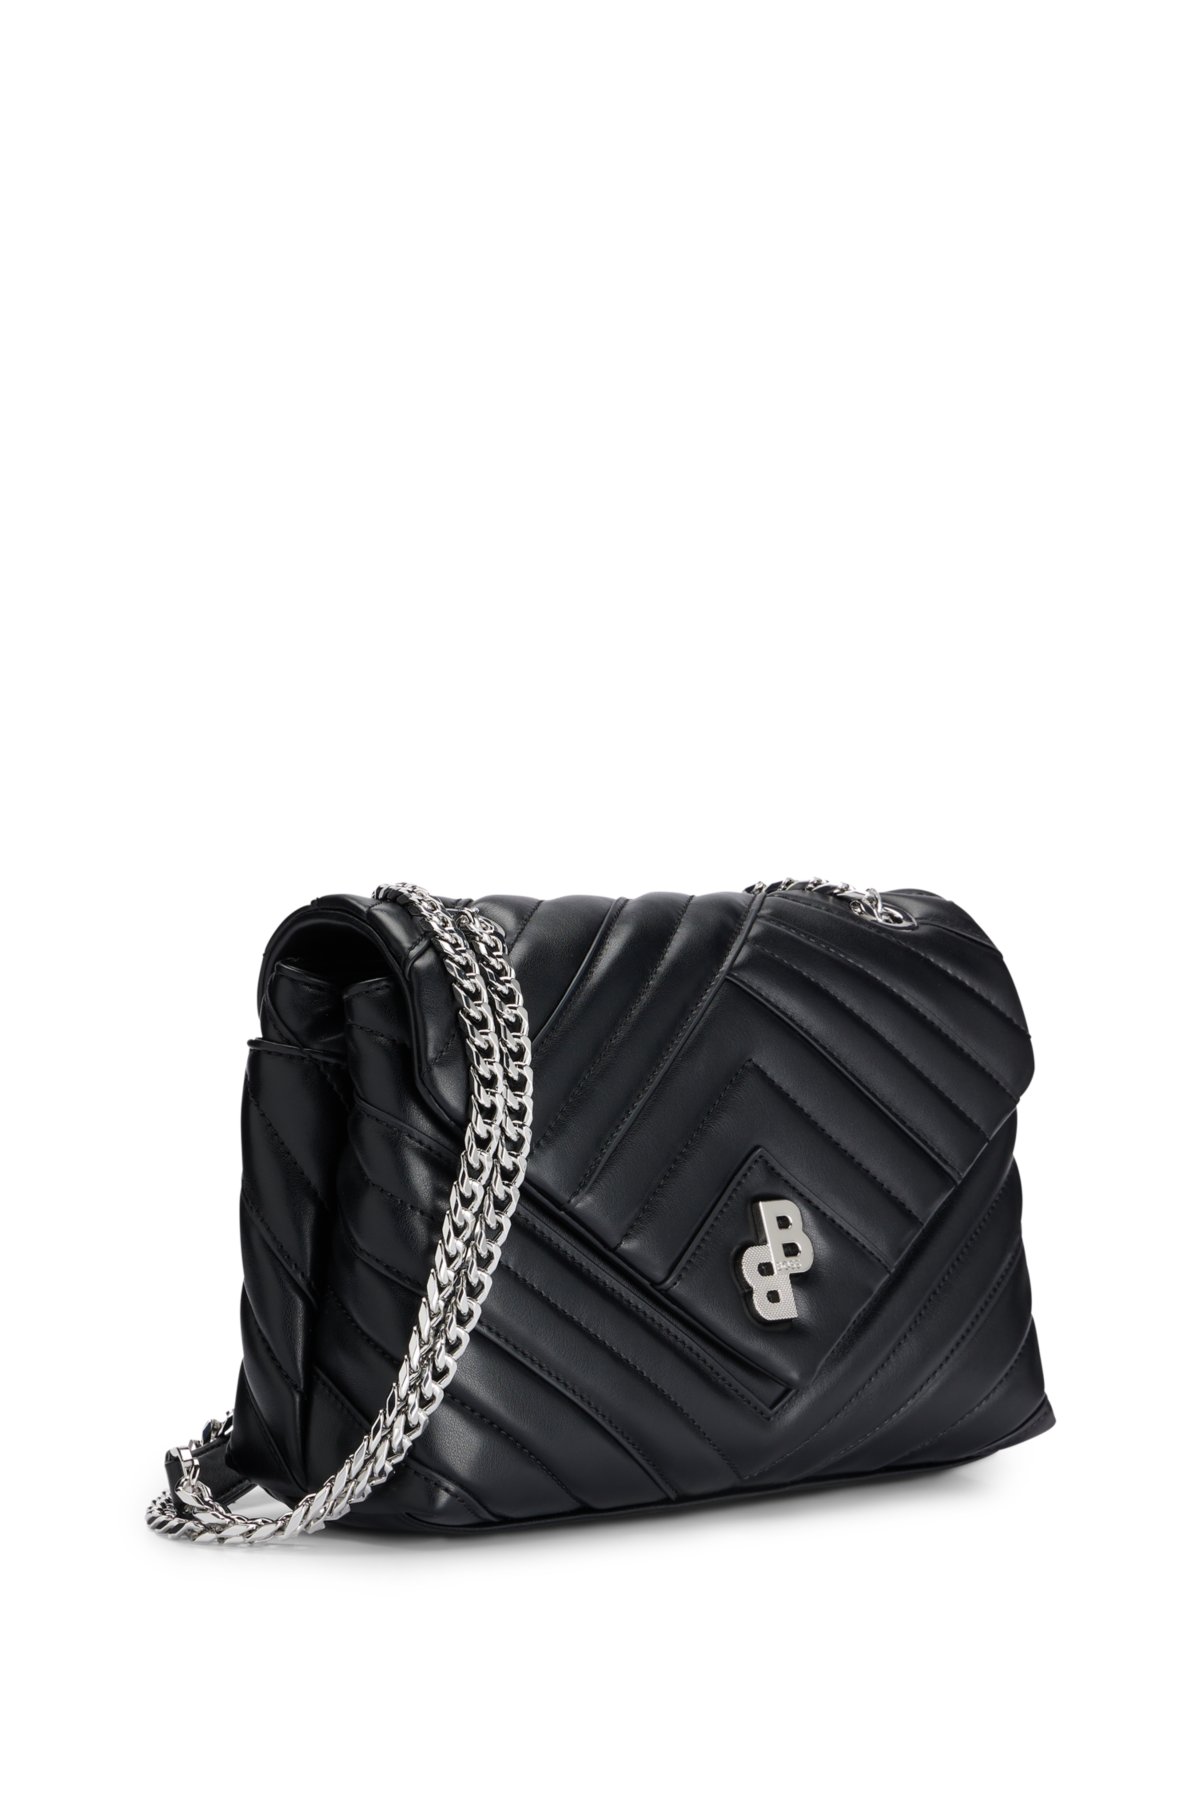 Quilted shoulder bag in faux leather with monogram hardware